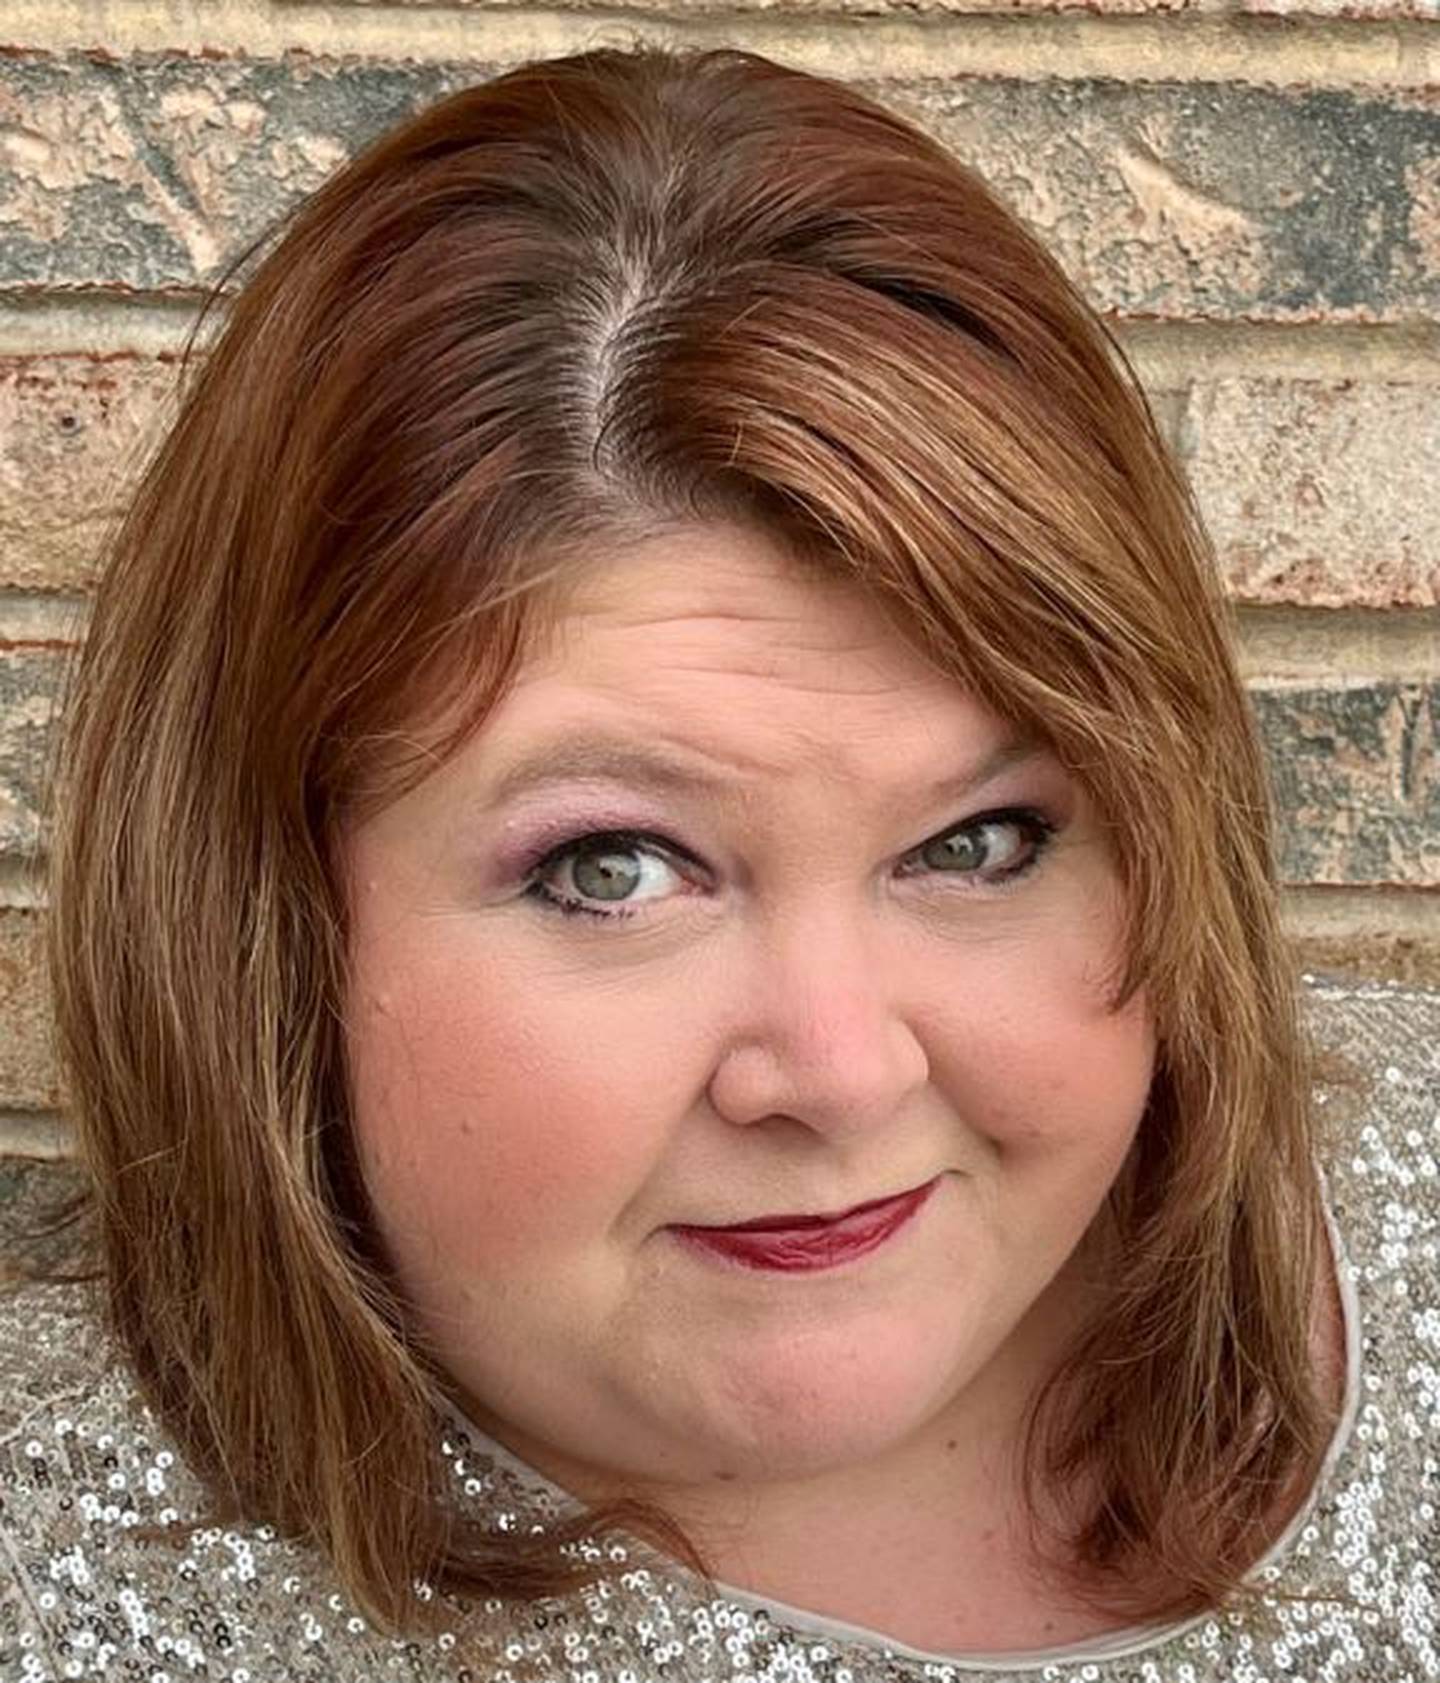 Comedian Lee Hardin is bringing his all-ages show to Stage 212 in La Salle at 2 p.m. Sunday, March 10, 2024. Kari Jones (above), a comedian from Mattoon, Ill., will open the show.